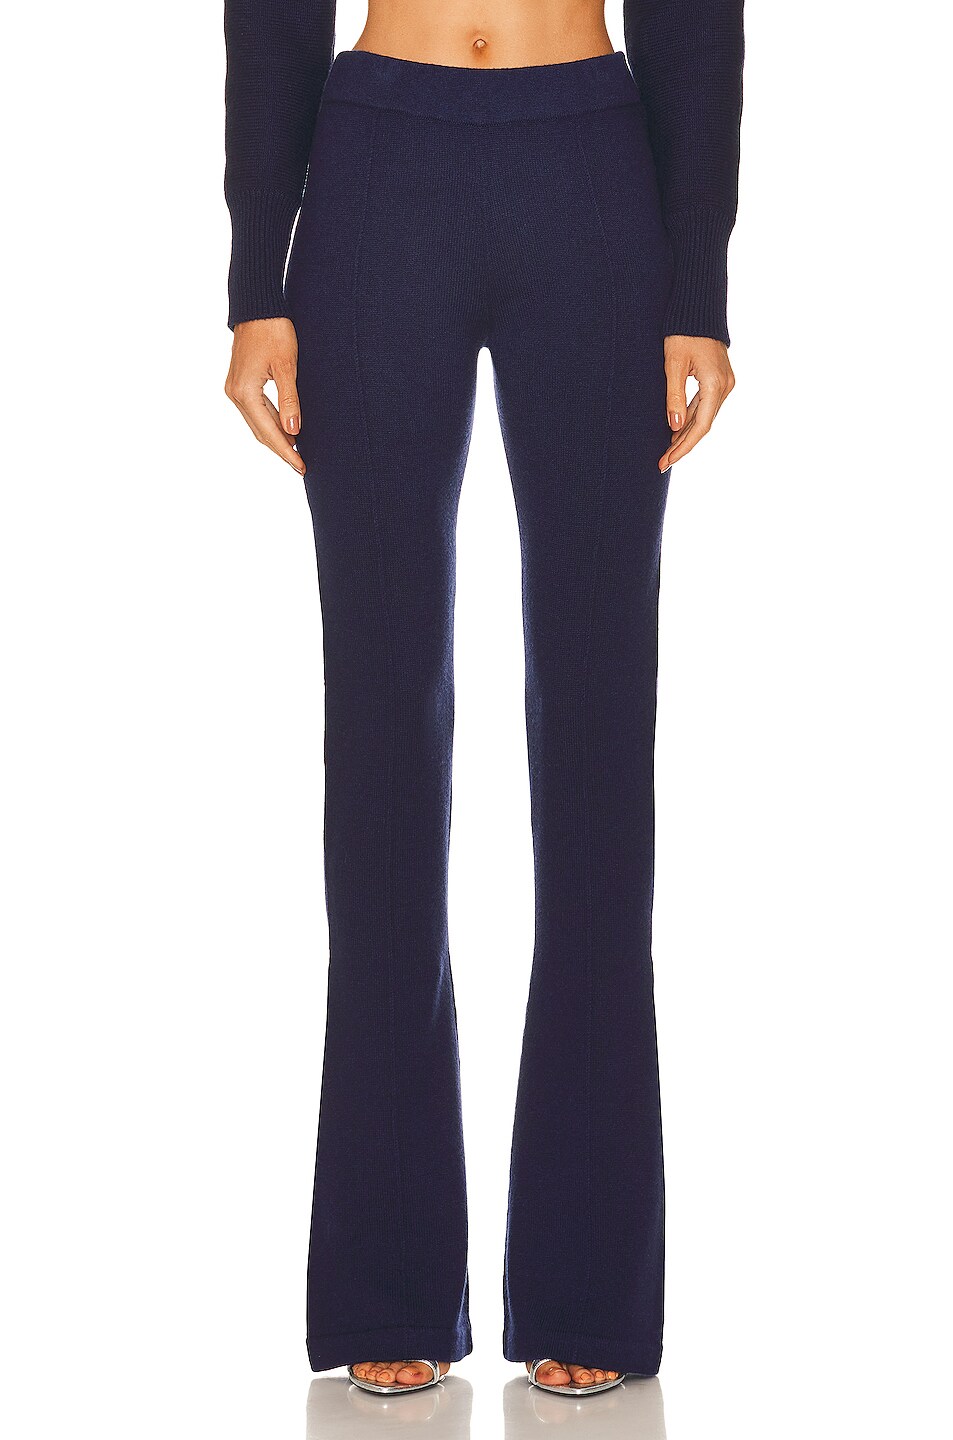 TOM FORD Cashmere Flare Pant in Ink | FWRD